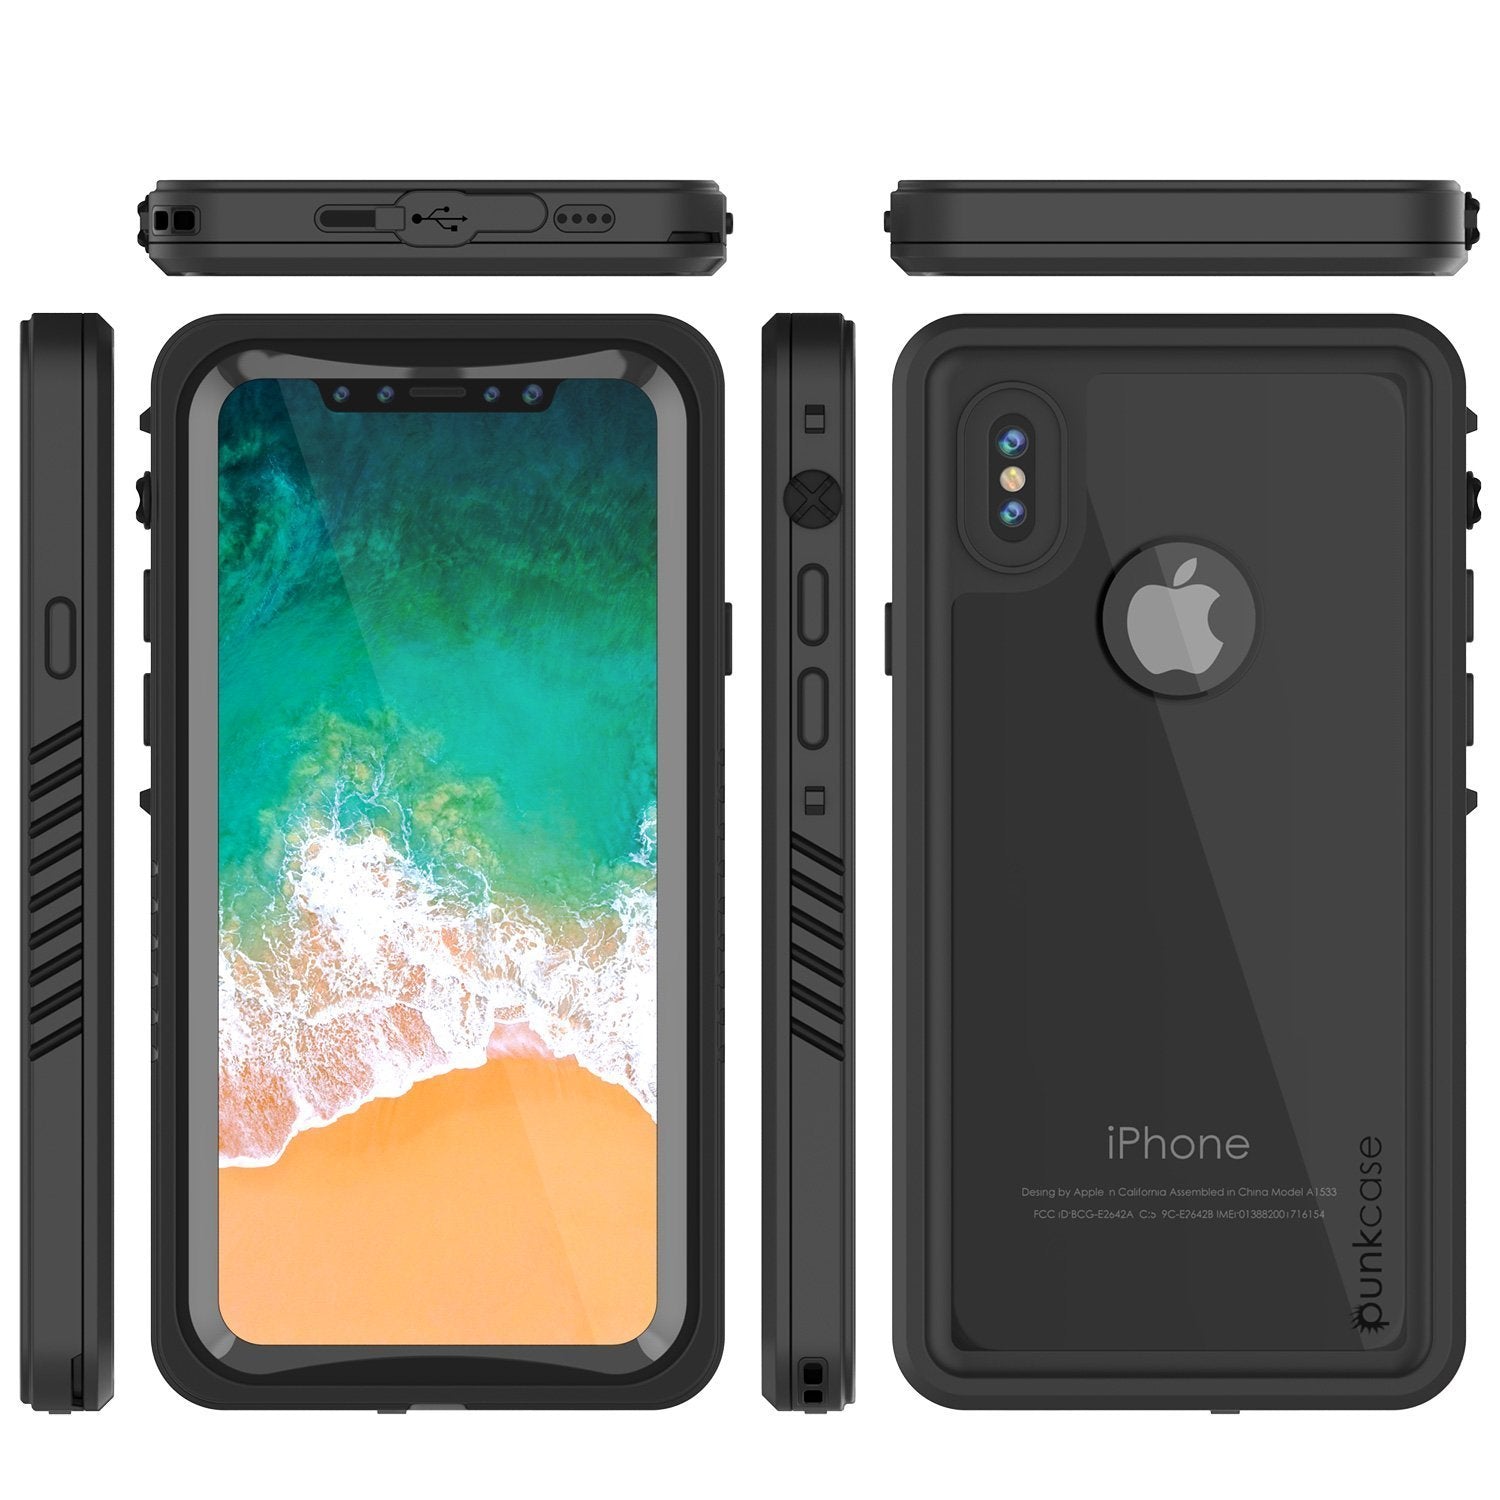 iPhone XS Max Waterproof Case, Punkcase [Extreme Series] Armor Cover W/ Built In Screen Protector [Black]